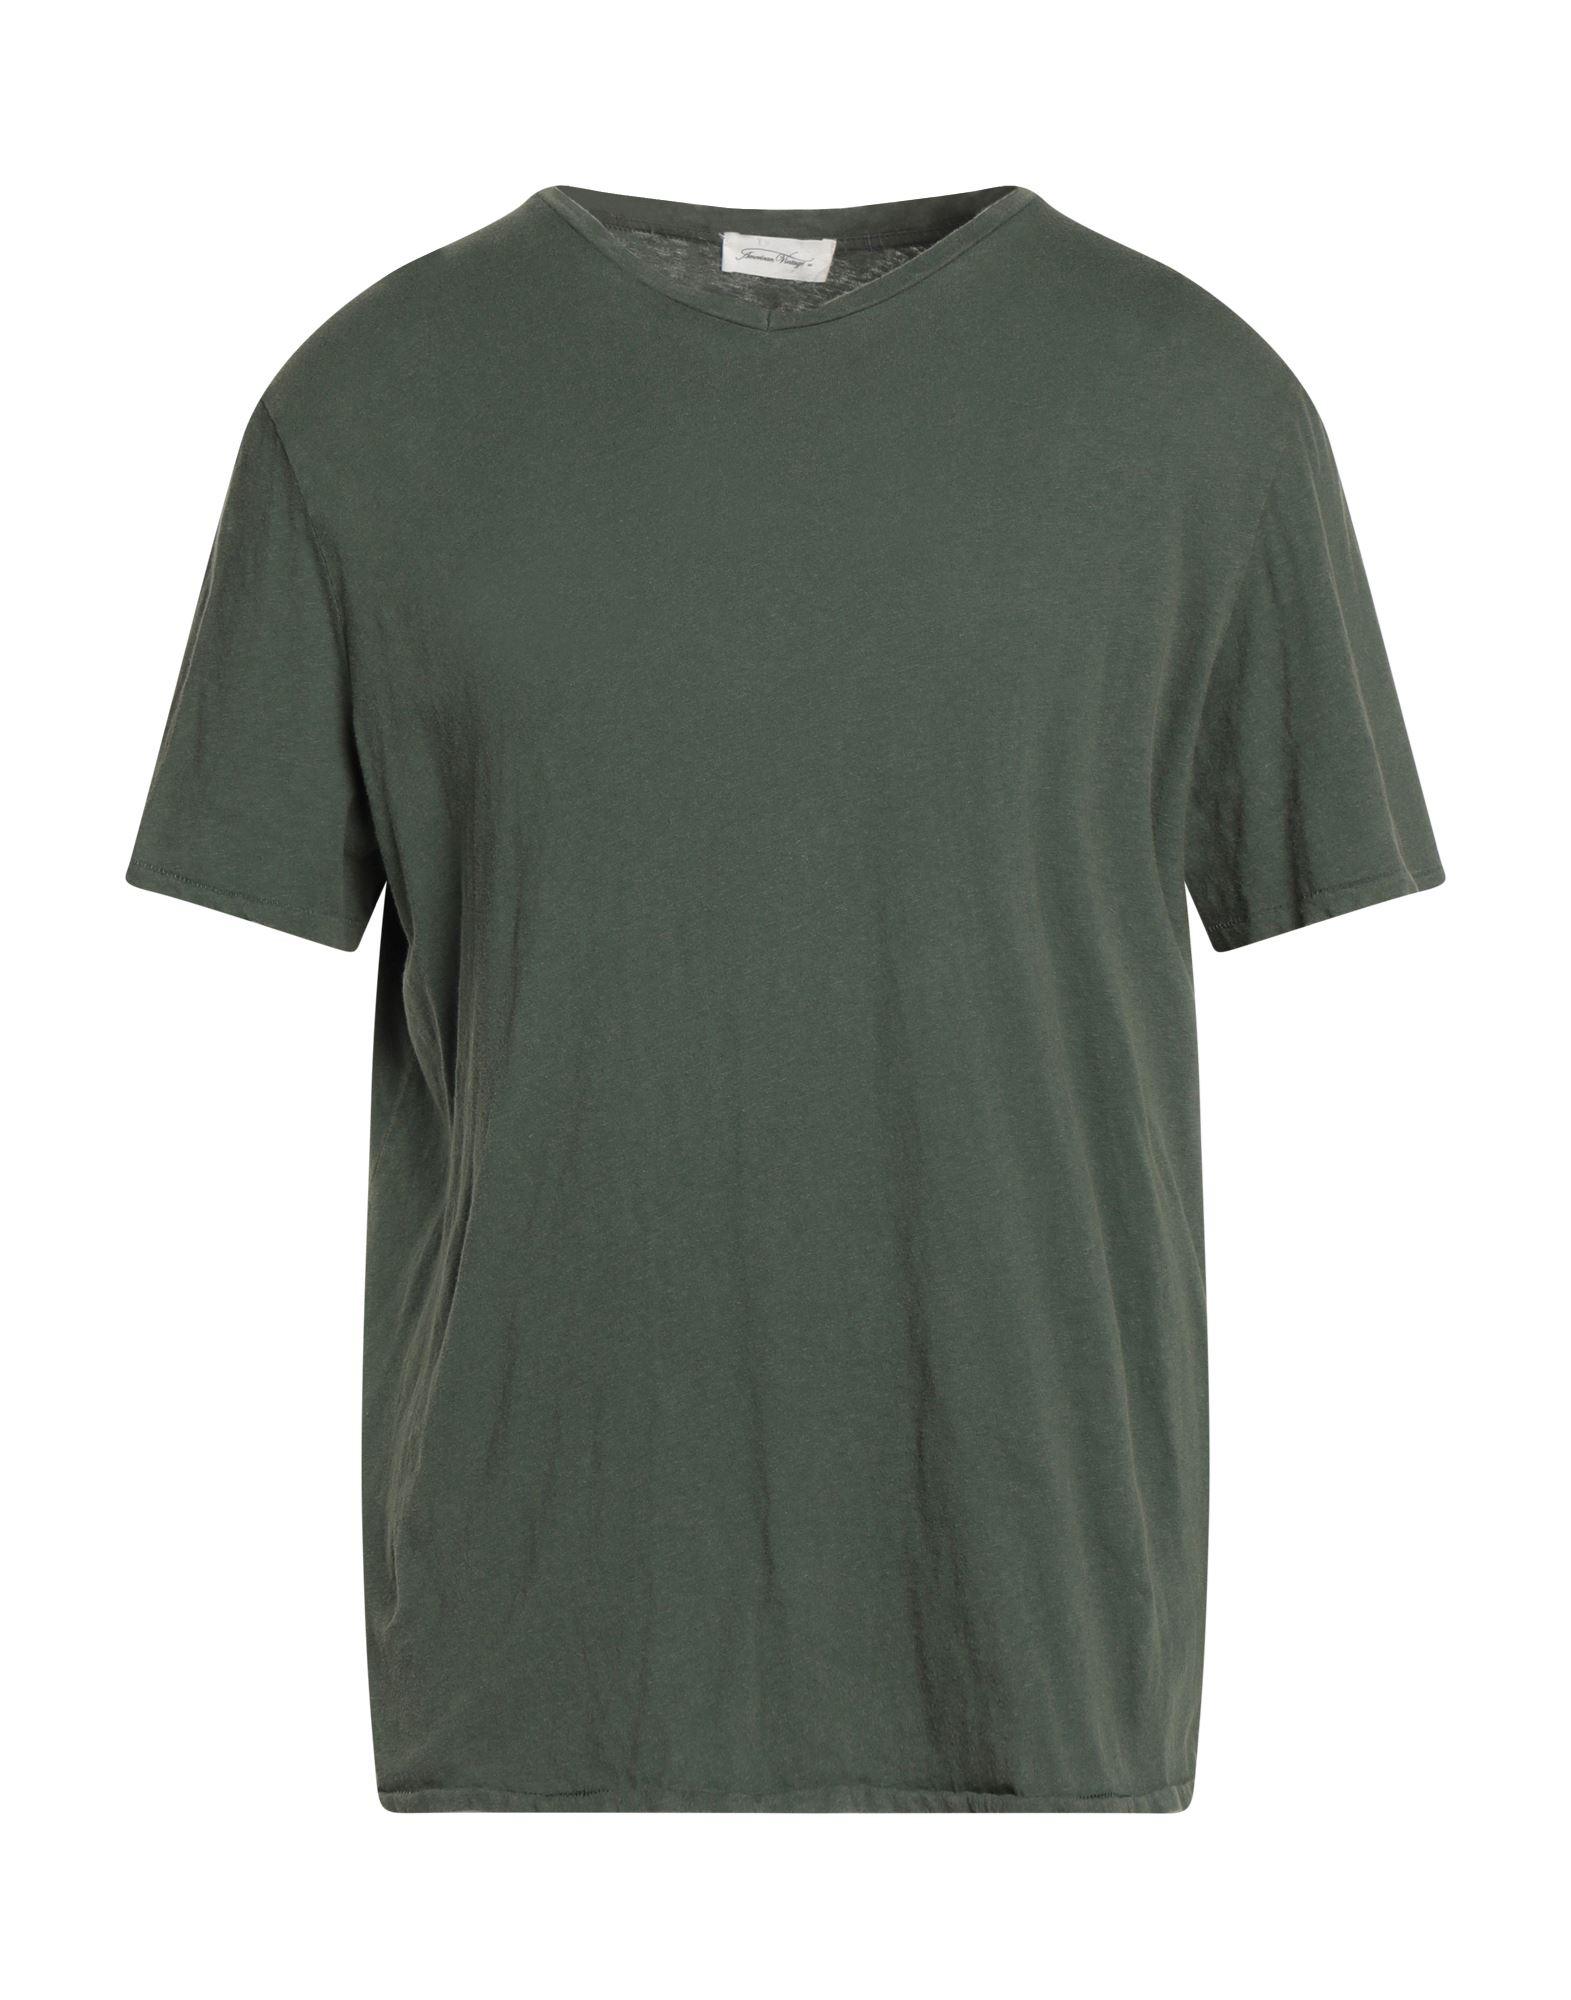 American Vintage Man T-shirt Military Green Size S Cotton